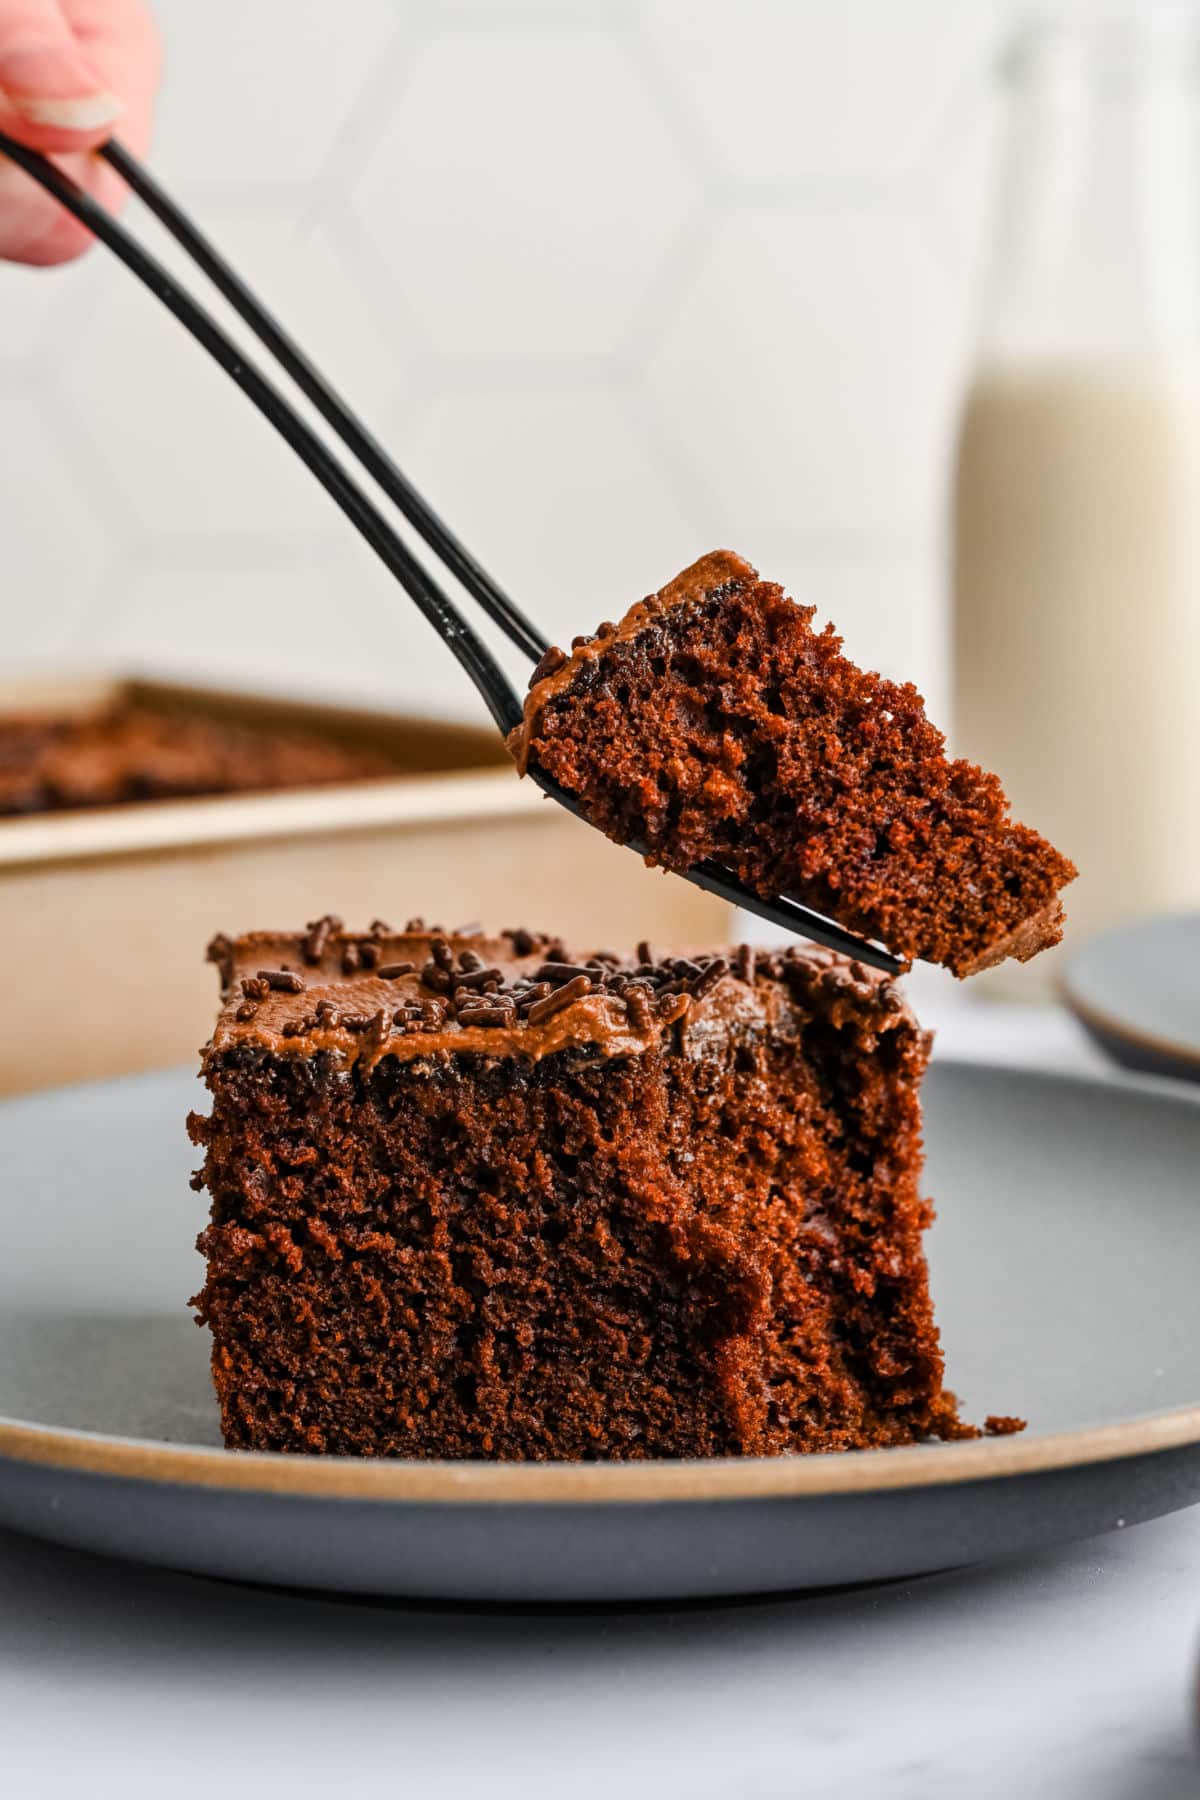 A fork taking a bite of a slice of chocolate mayonnaise cake.